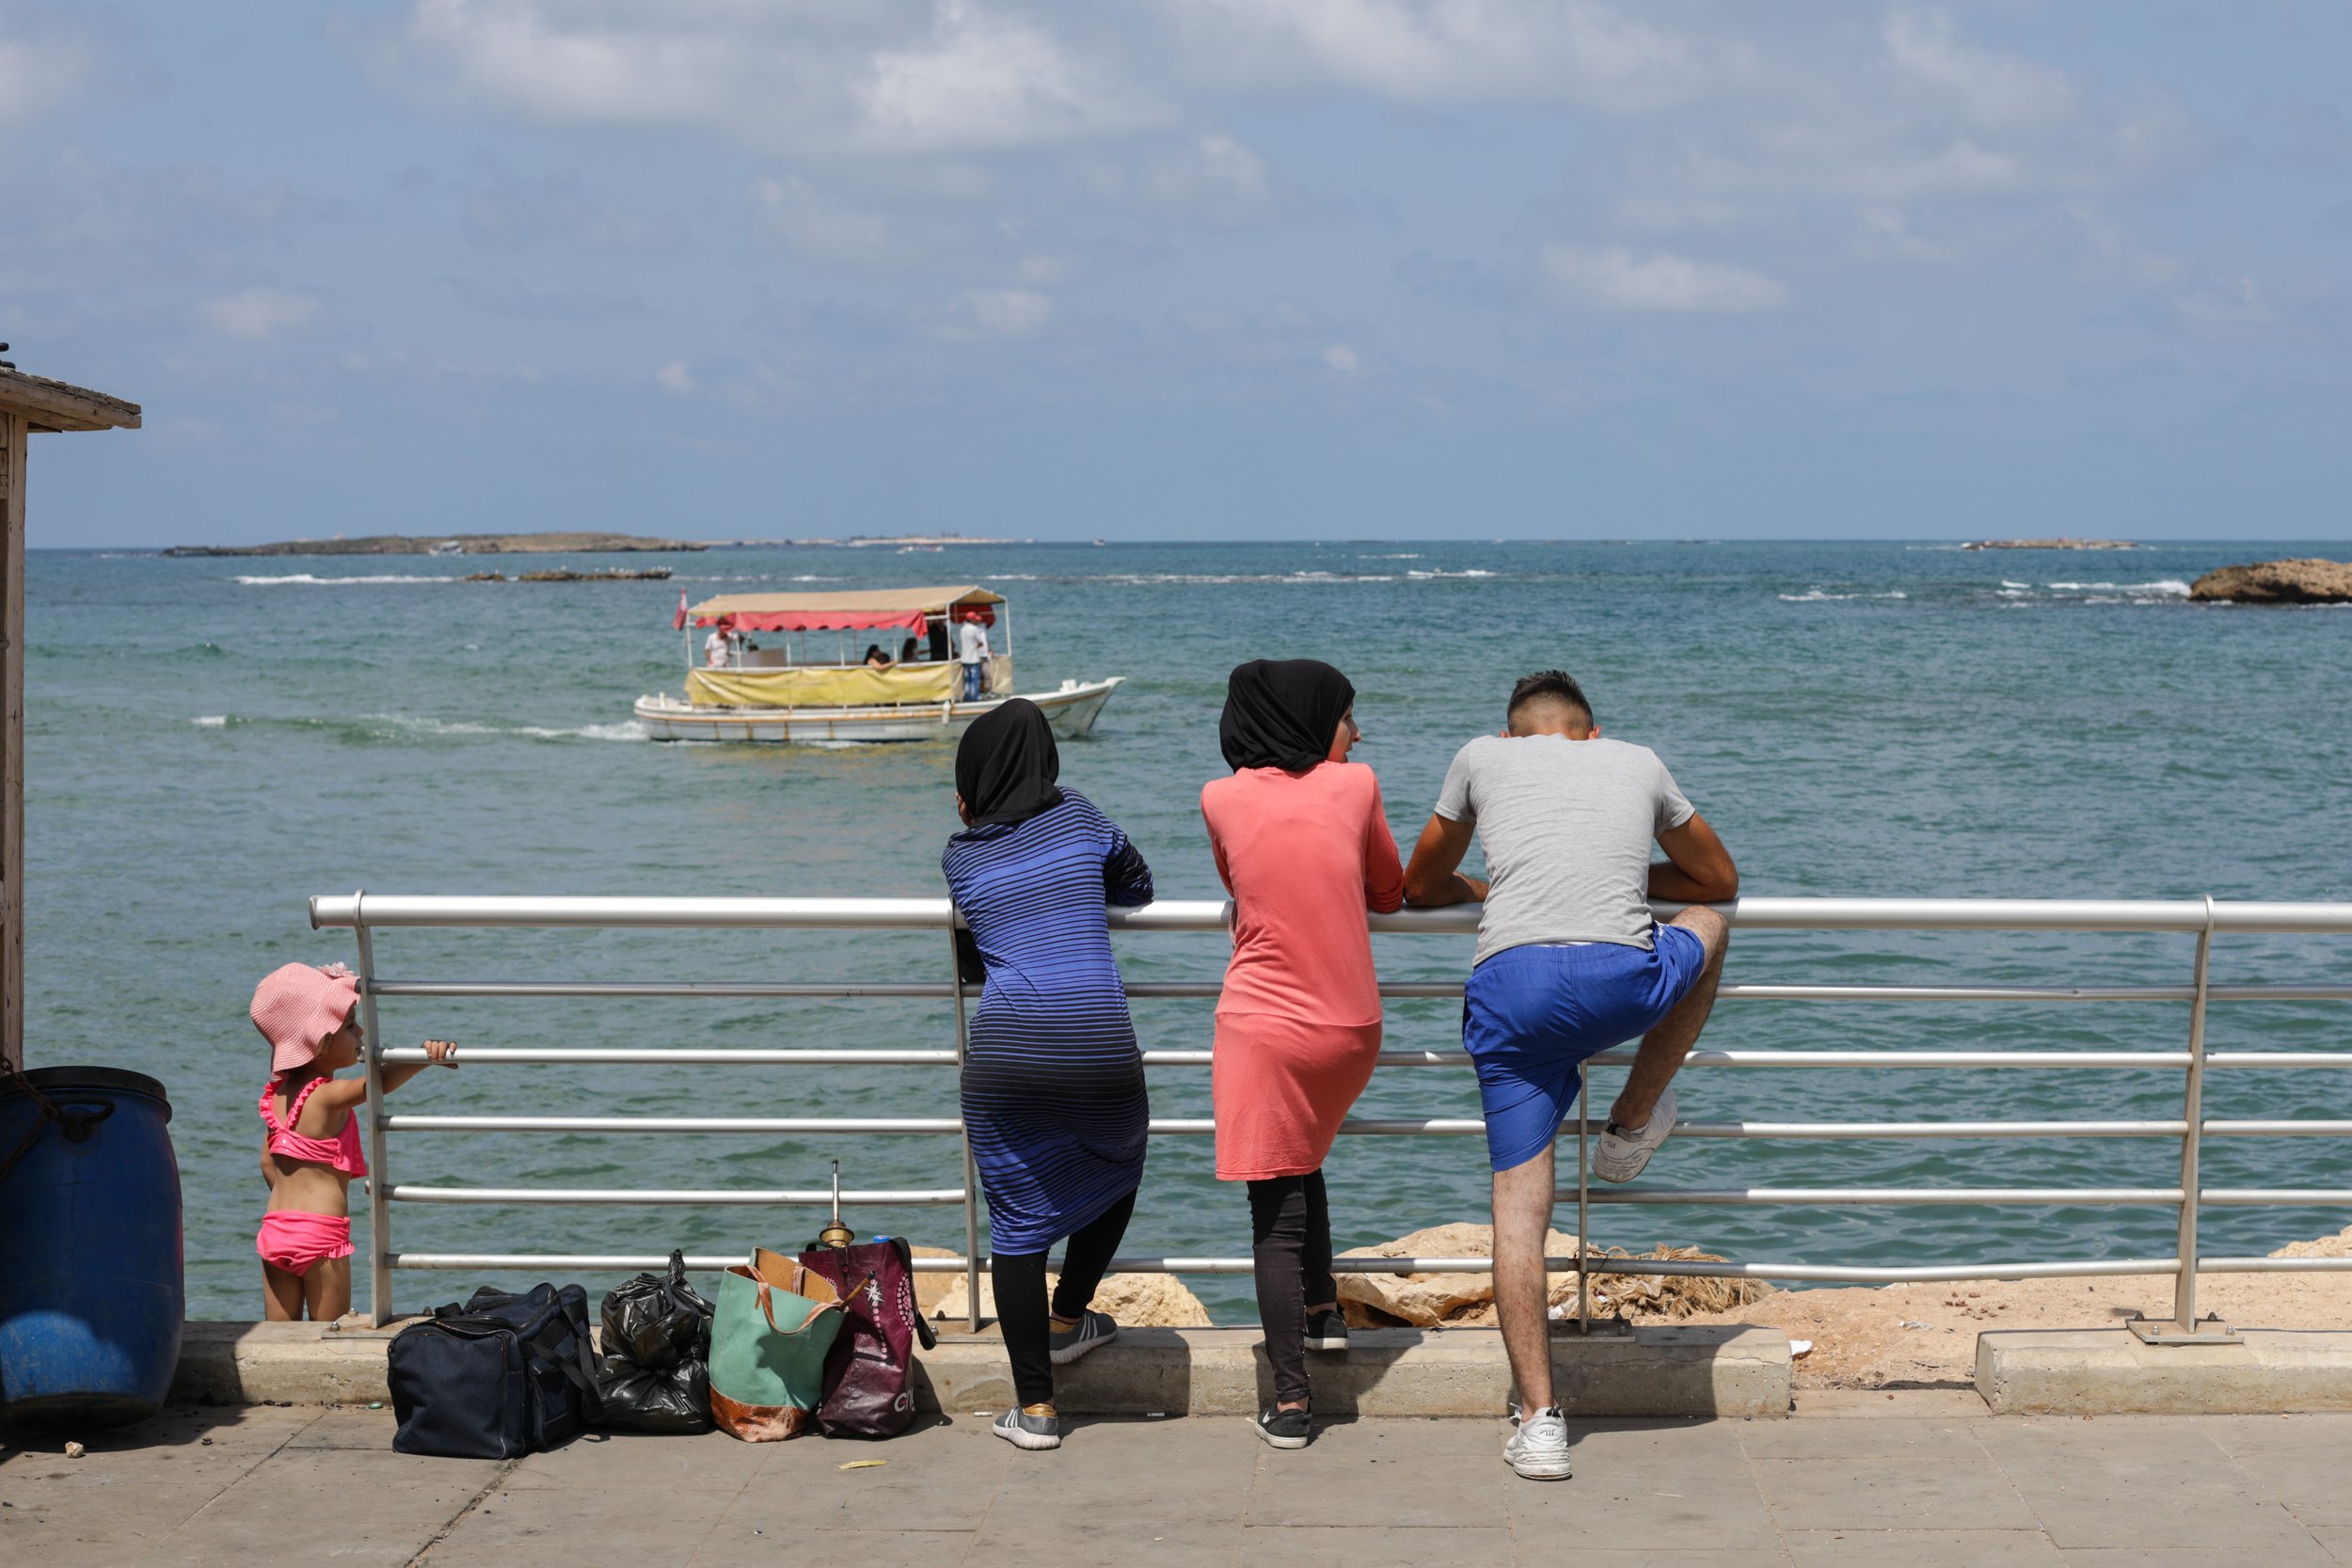 Street photography on the seafront of Tripoli, Lebanon